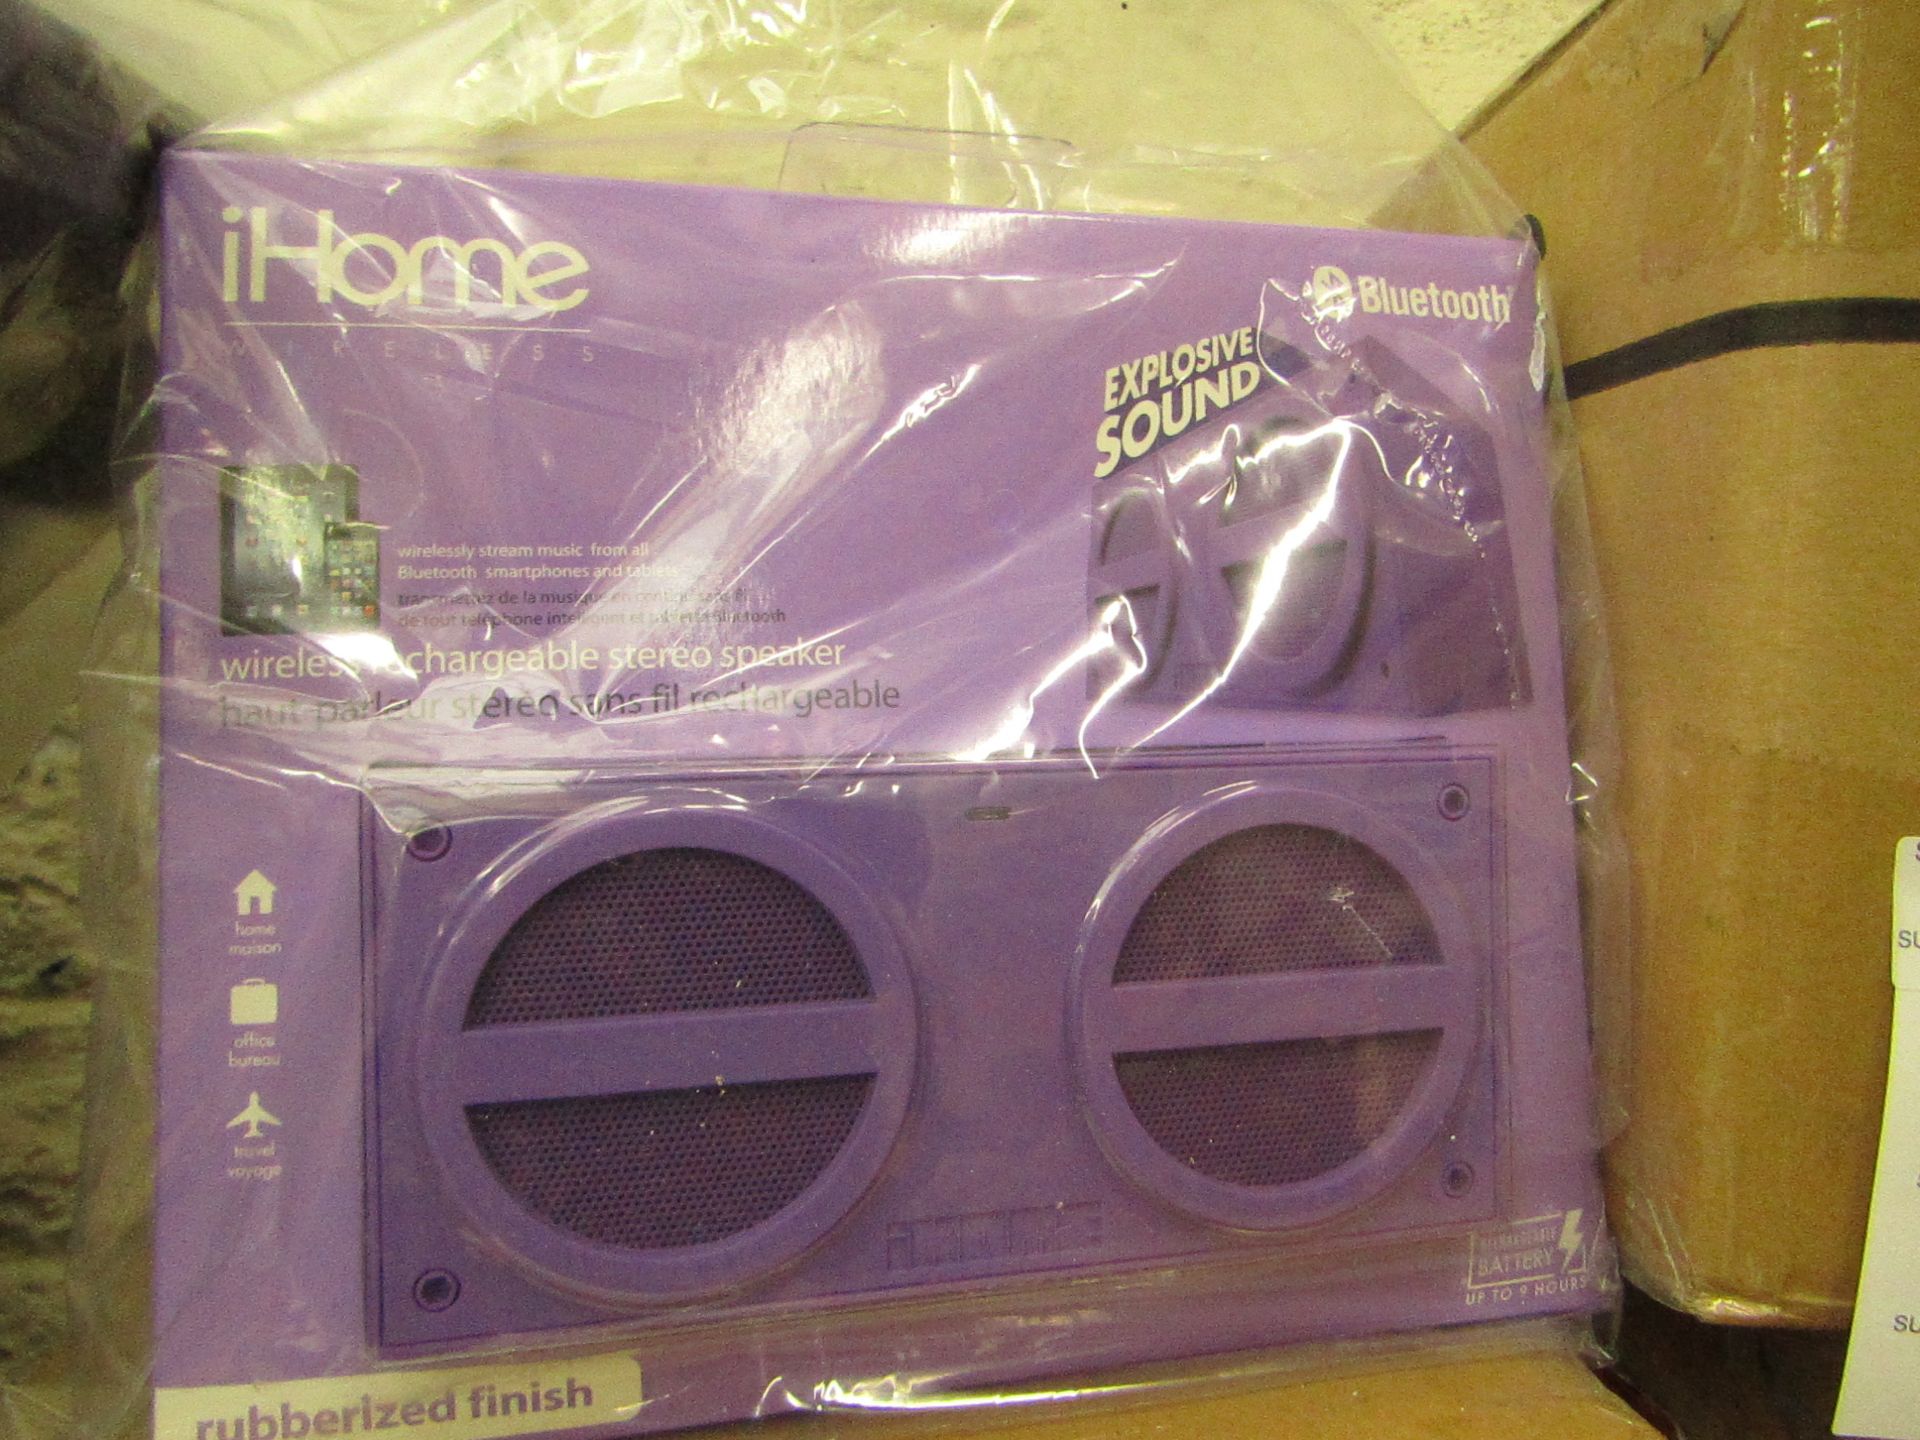 iHome wireless rechargable bluetooth speaker - New & Packaged.